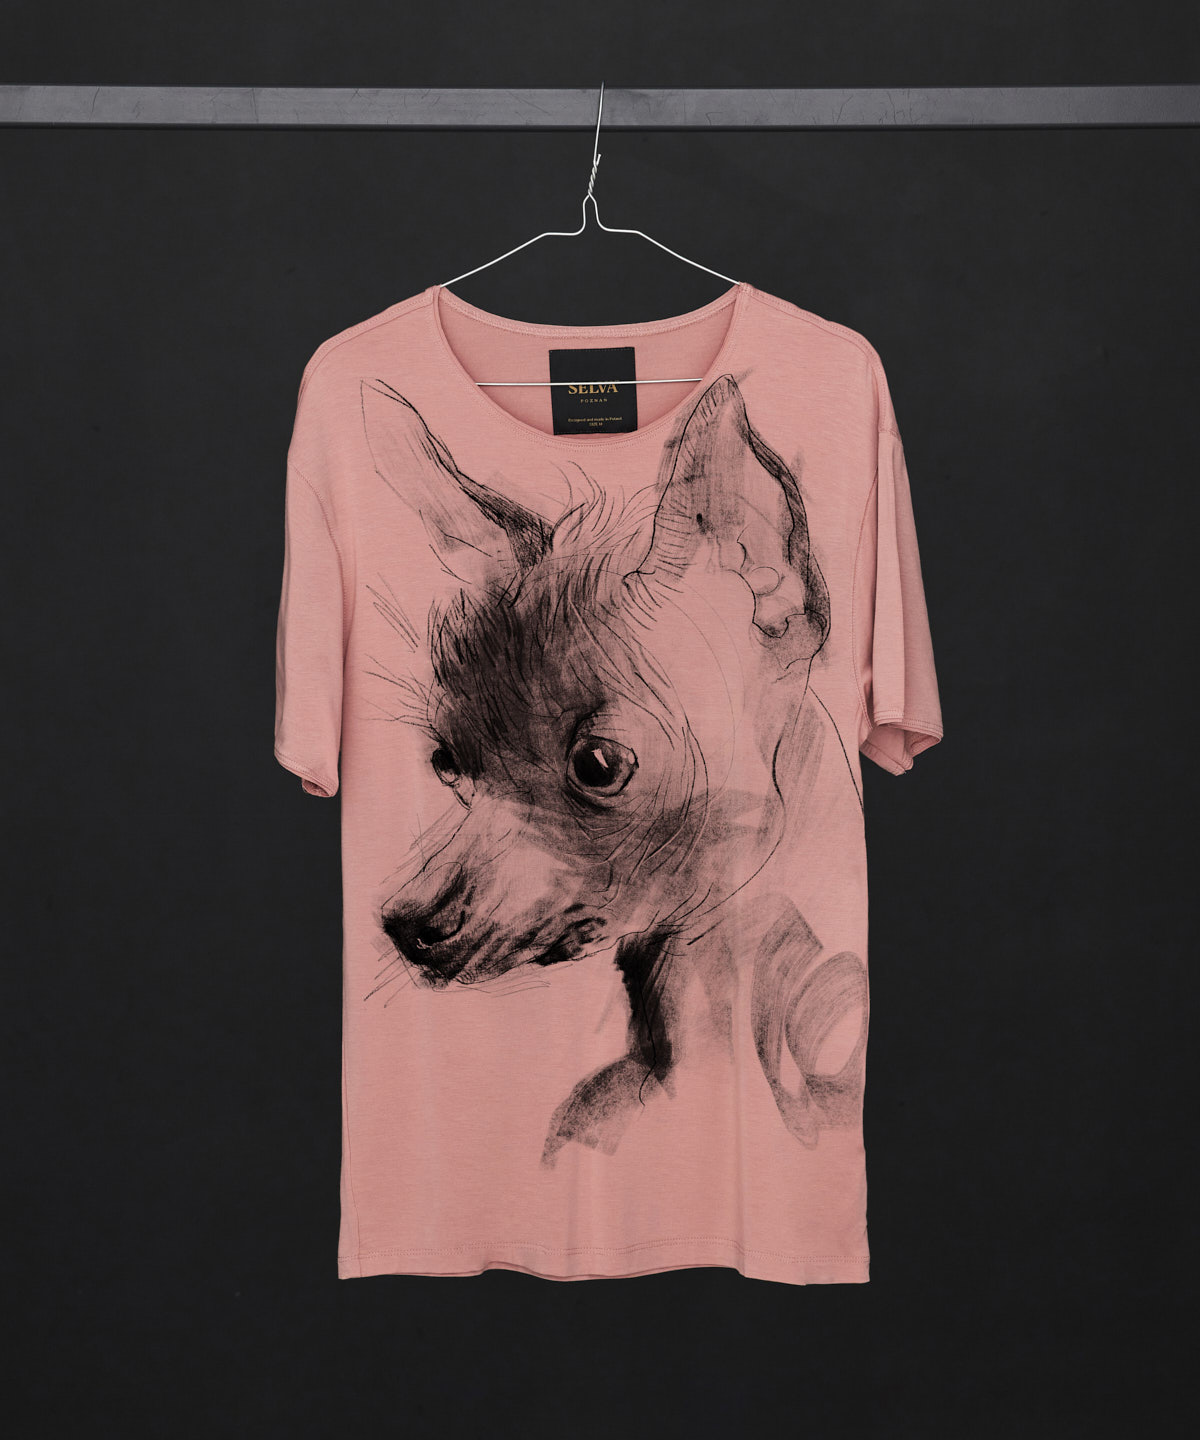 Chinese Crested Dog light pink t-shirt MAN